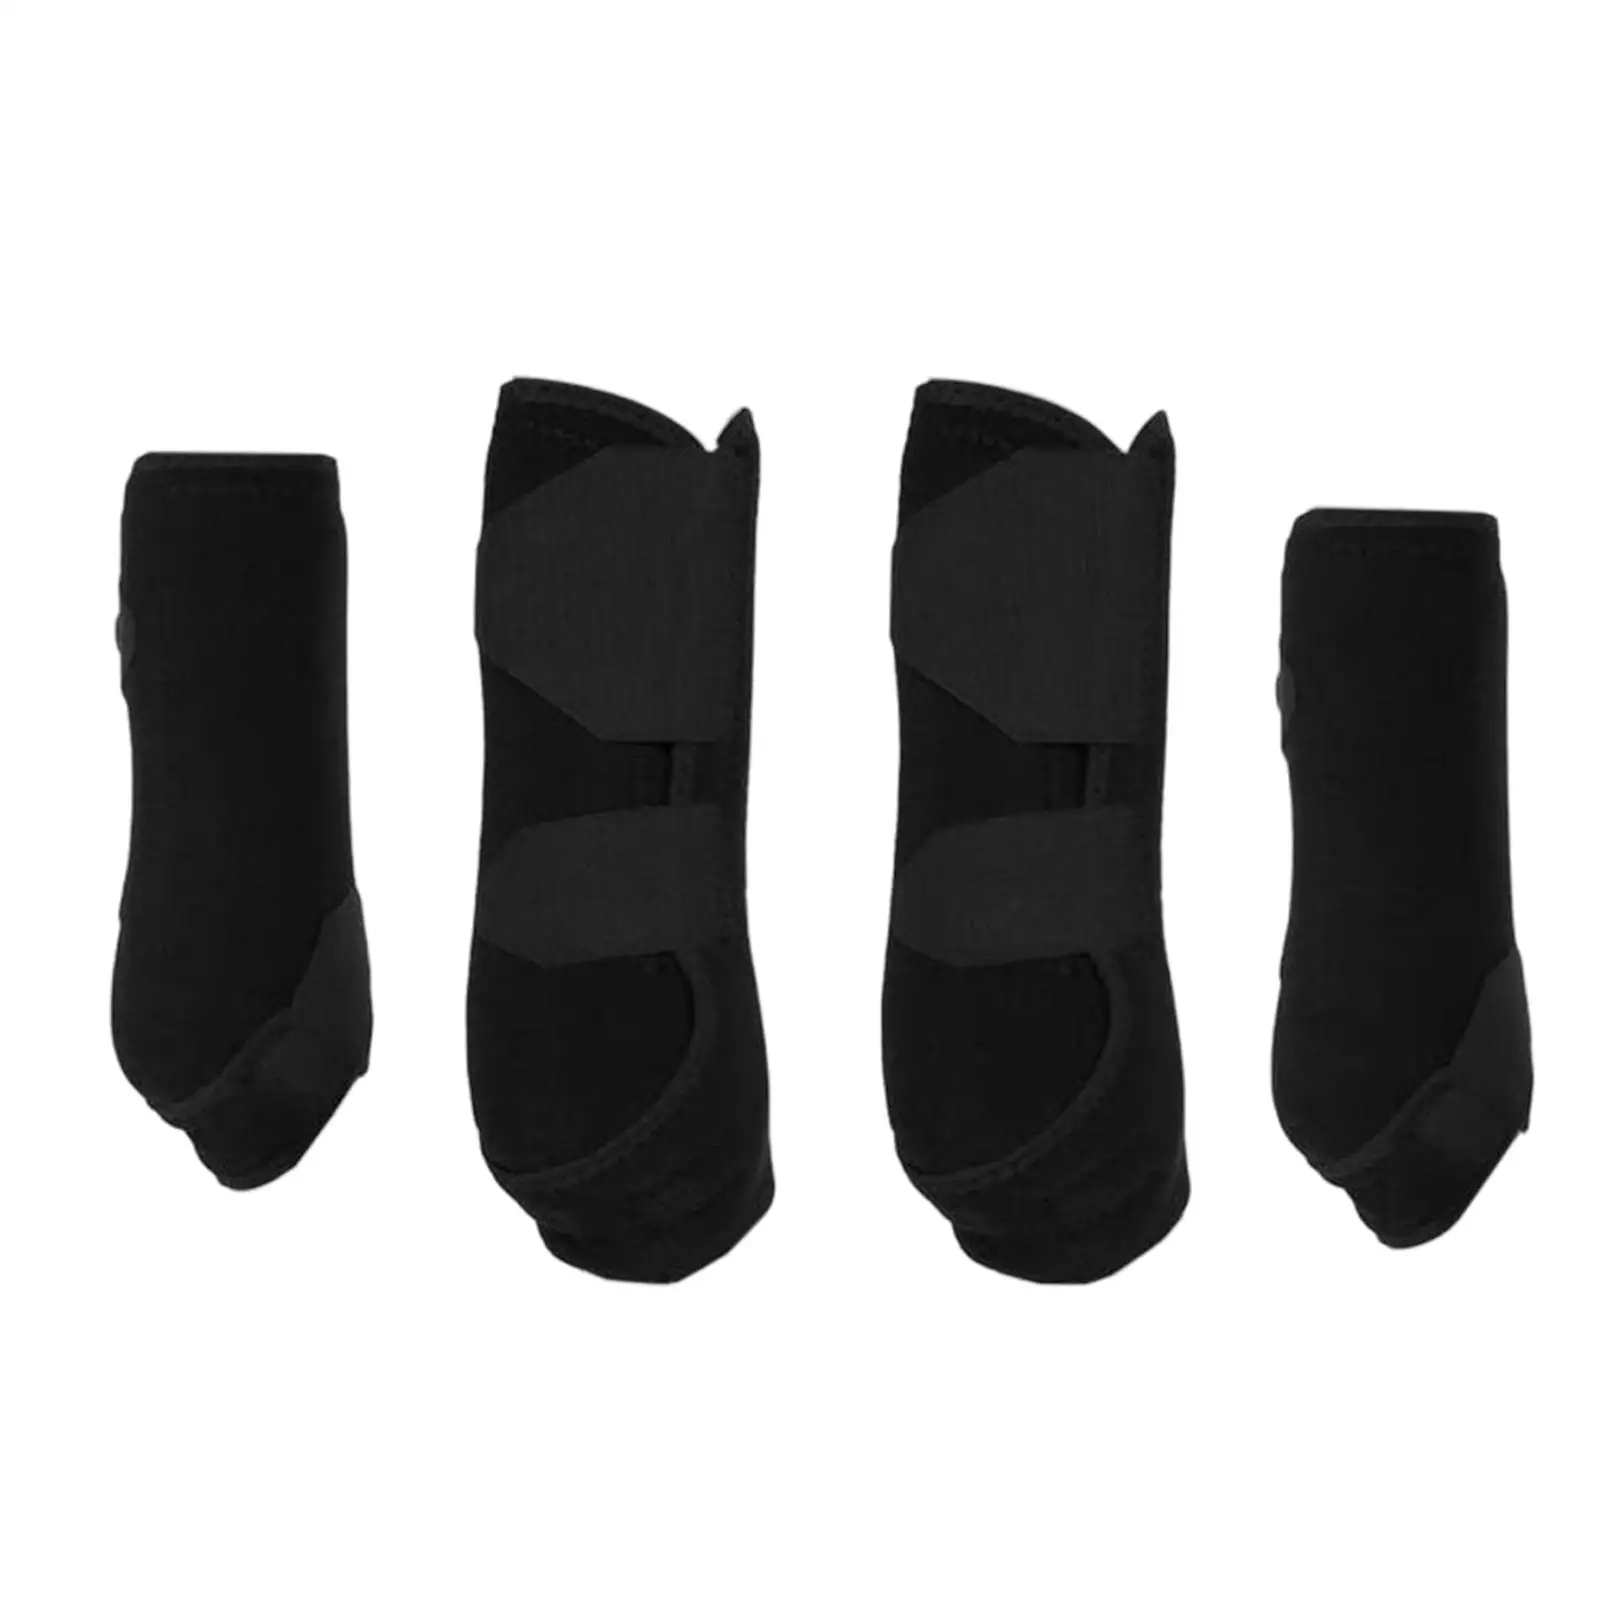 4Pcs Horse Boots Leg Protection Wraps Protector Guard for Riding Training